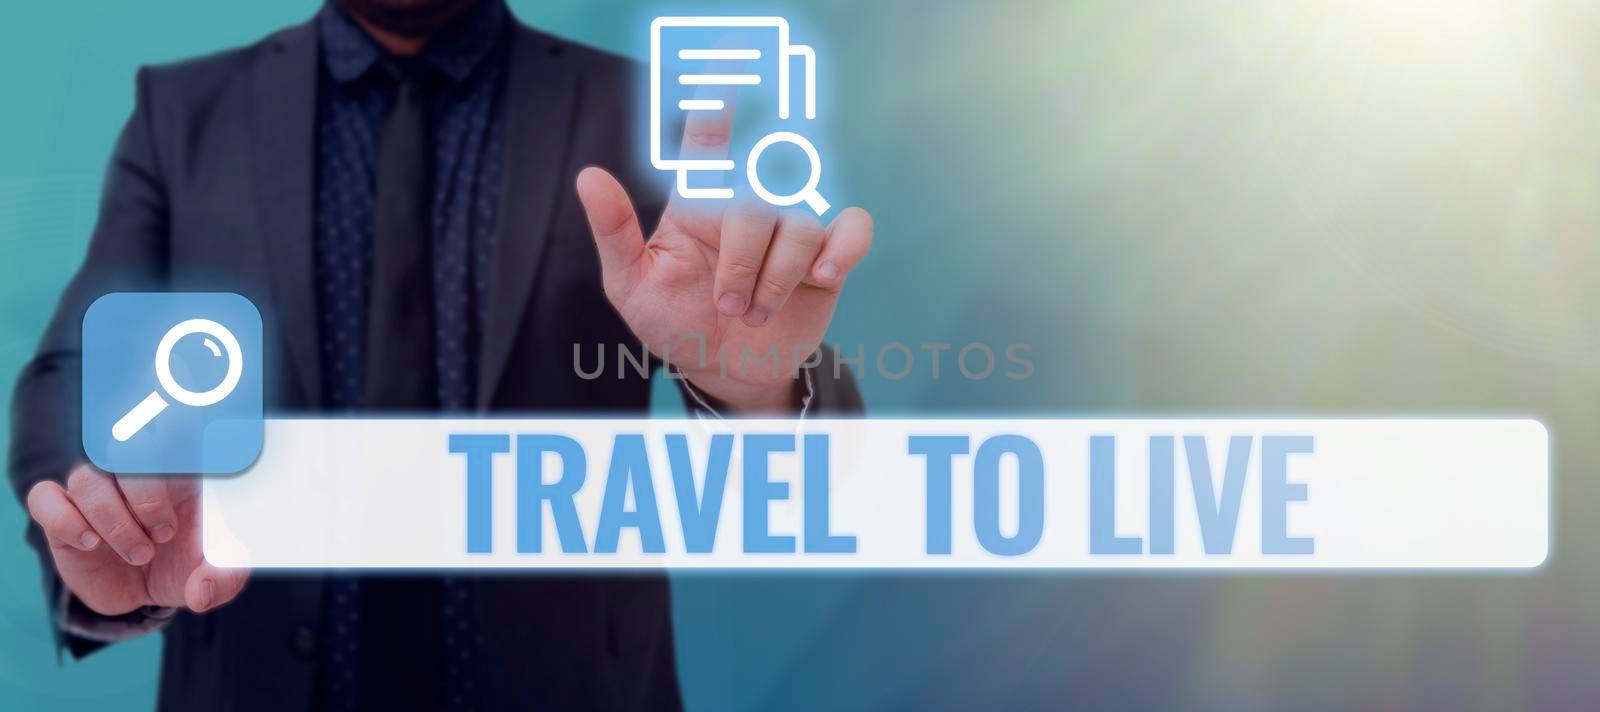 Conceptual caption Travel To Live. Concept meaning Get knowledge and exciting adventures by going on trips Businessman in suit holding open palm symbolizing successful teamwork. by nialowwa